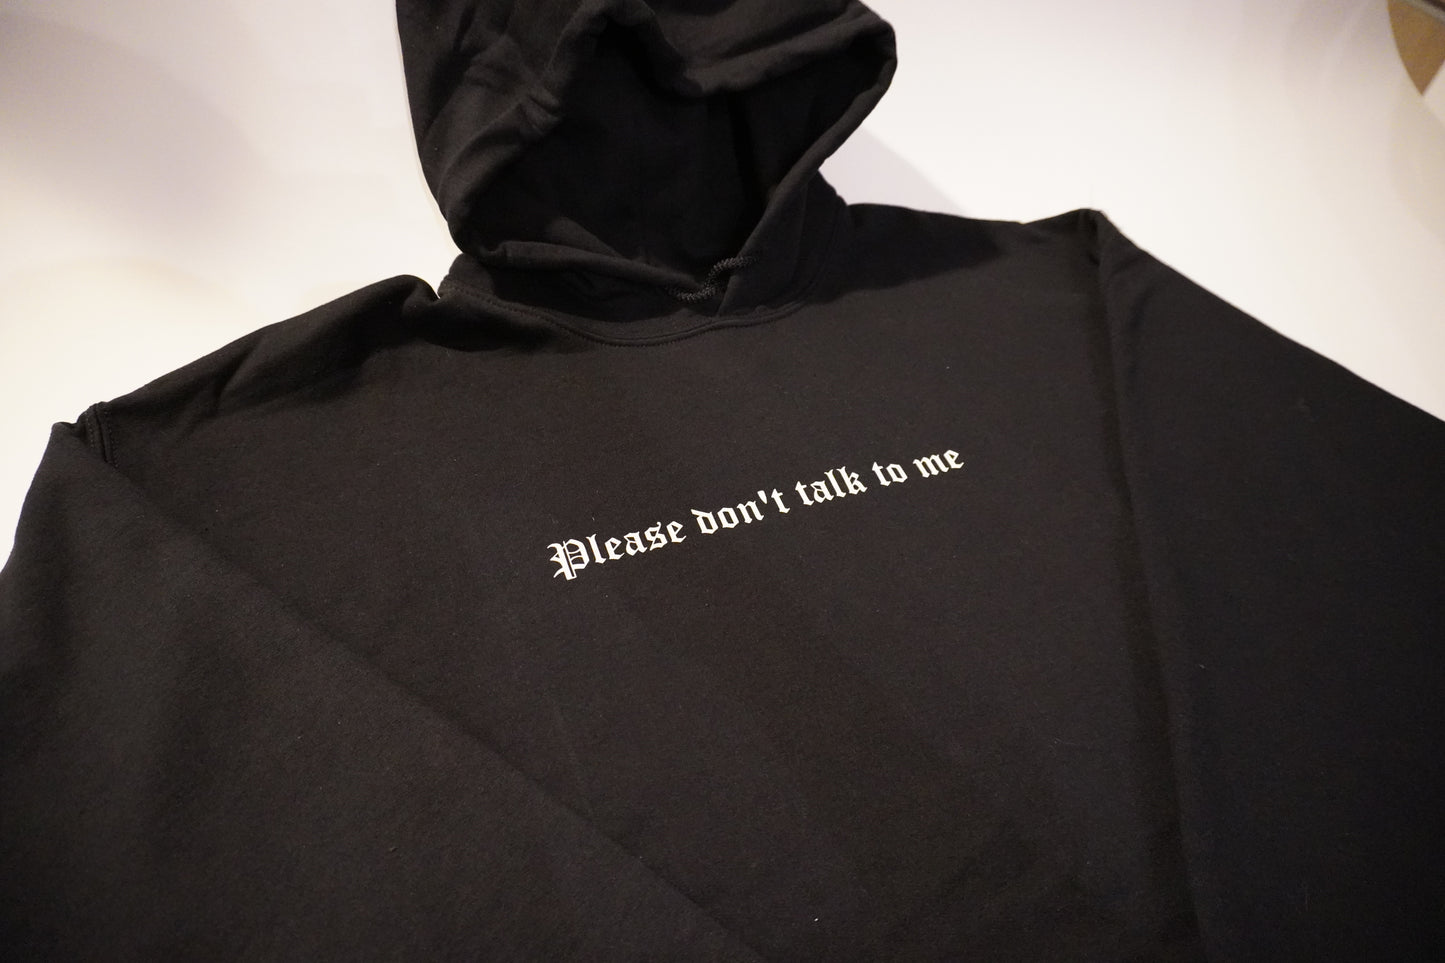 “Please don’t talk to me” hoodie